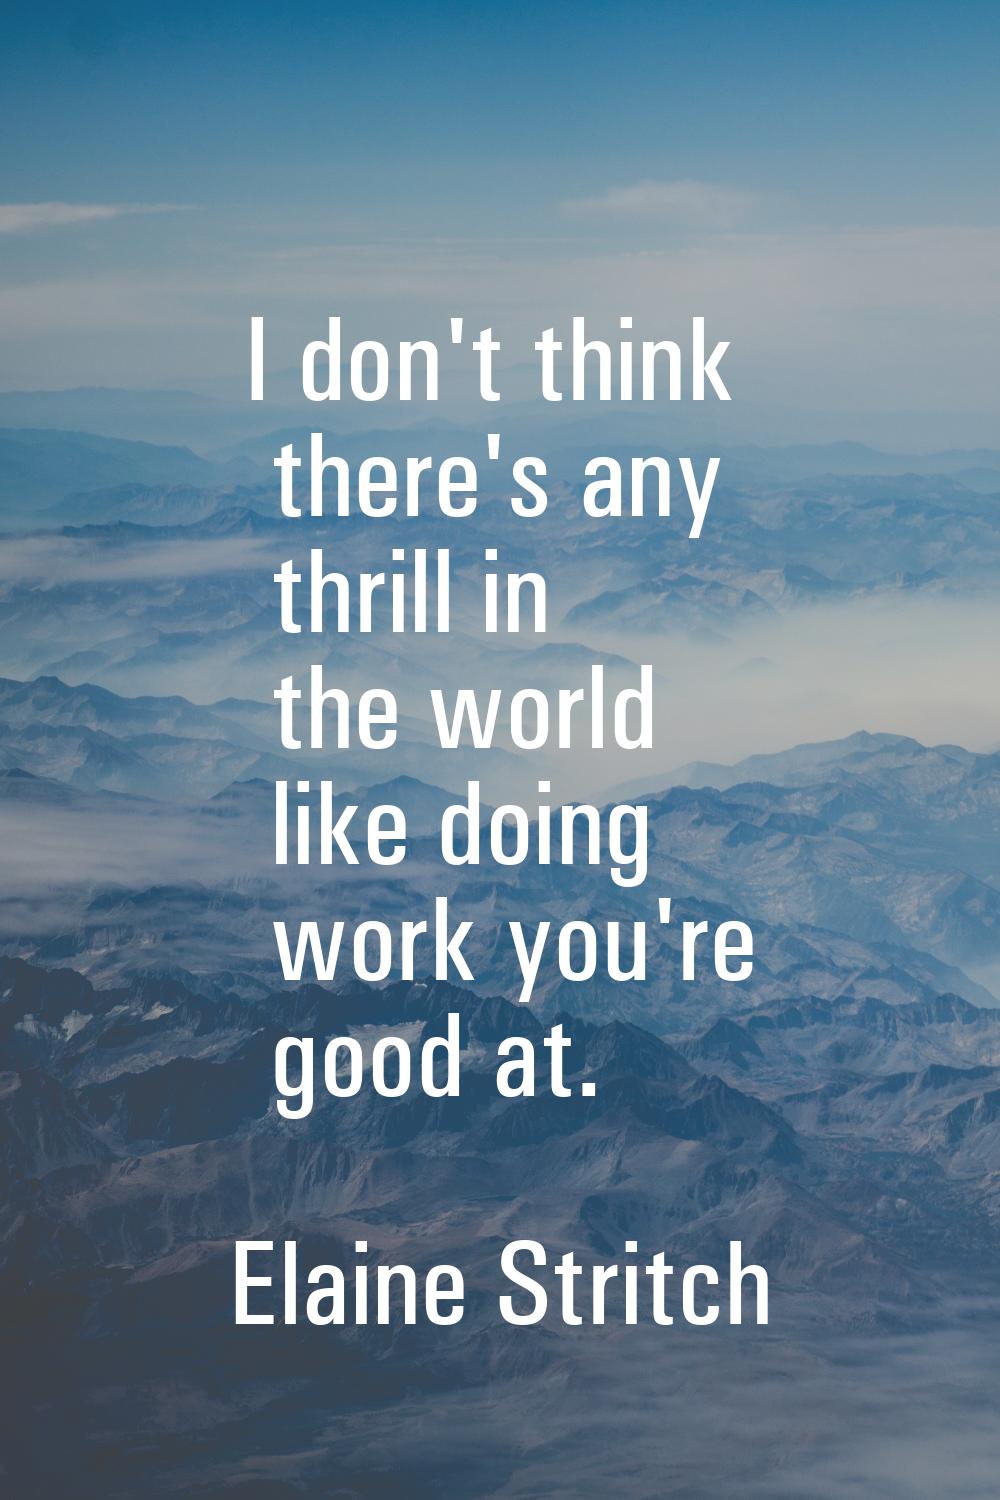 I don't think there's any thrill in the world like doing work you're good at.